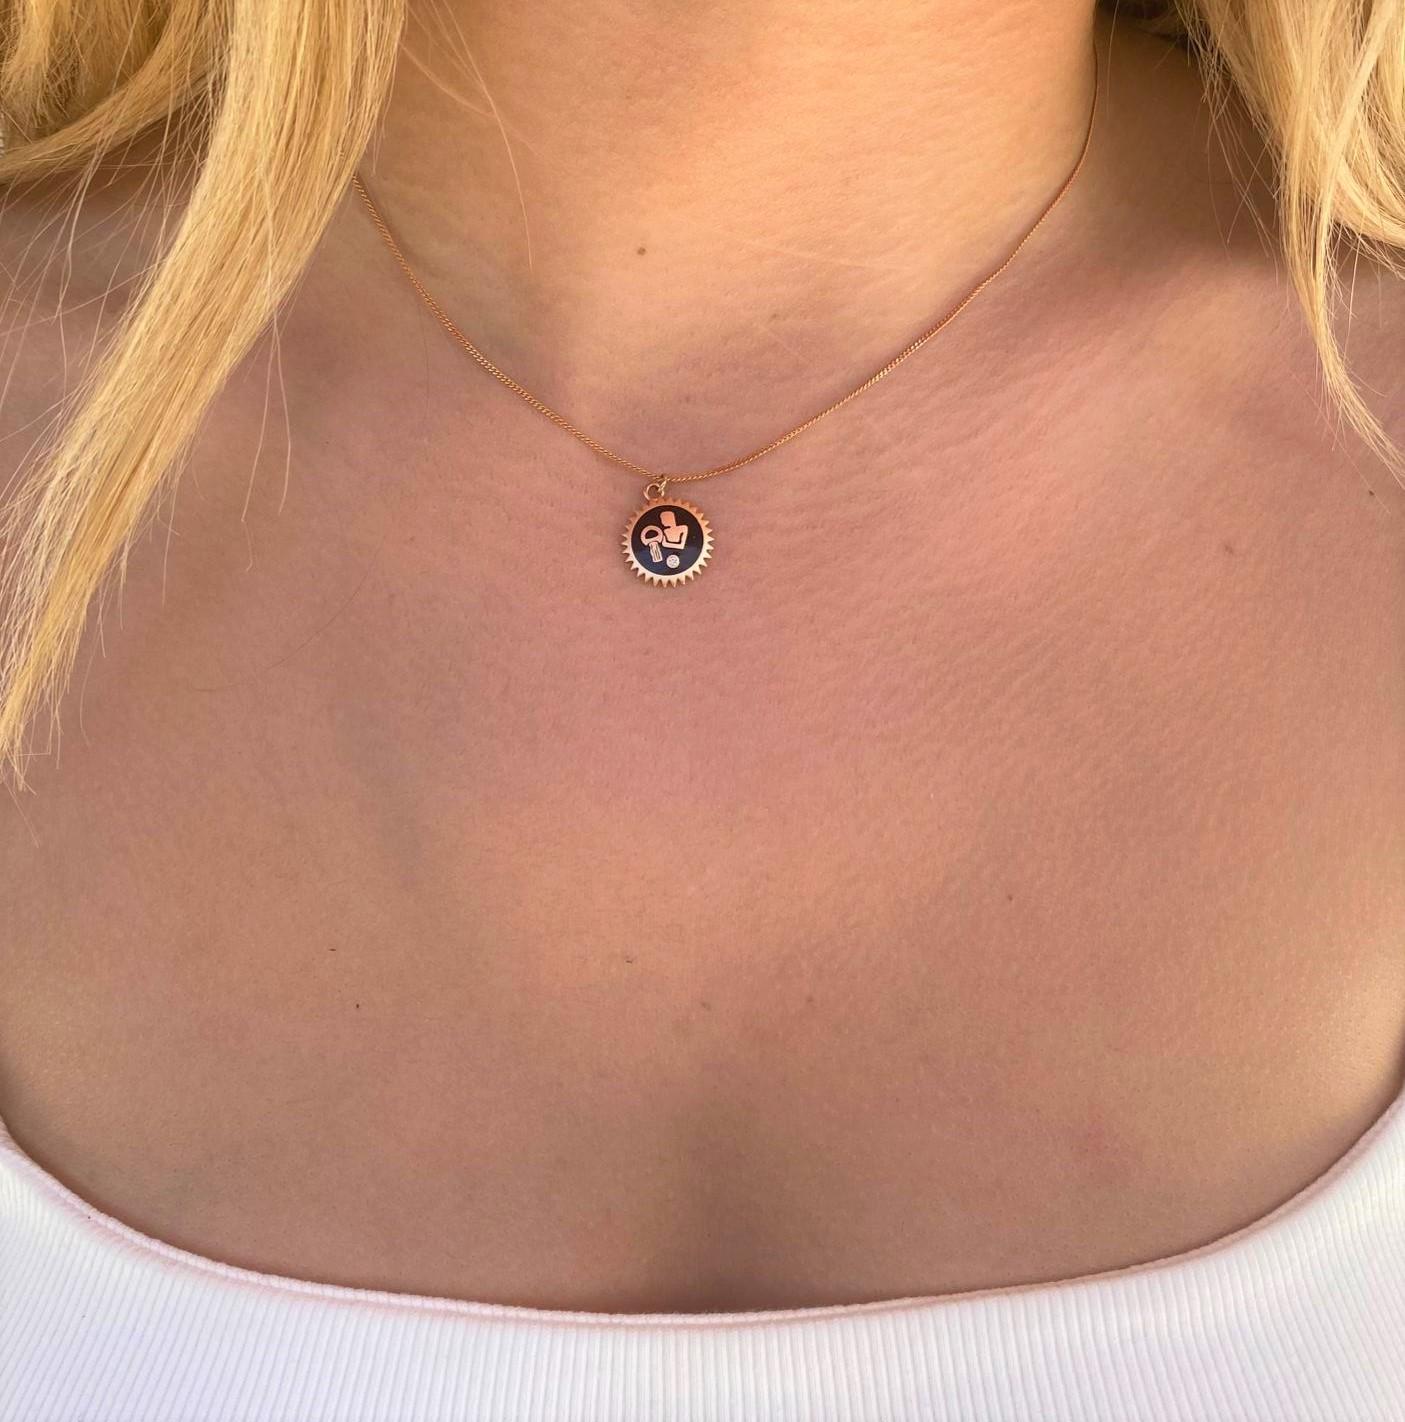 Aries necklace with coral enamel & white diamond in 14k rose gold by selda jewellery

Additional Information:-
Collection: Zodiac collection
14K Rose gold
0.01ct White diamond
Pendant height 1cm
Chain length 40cm